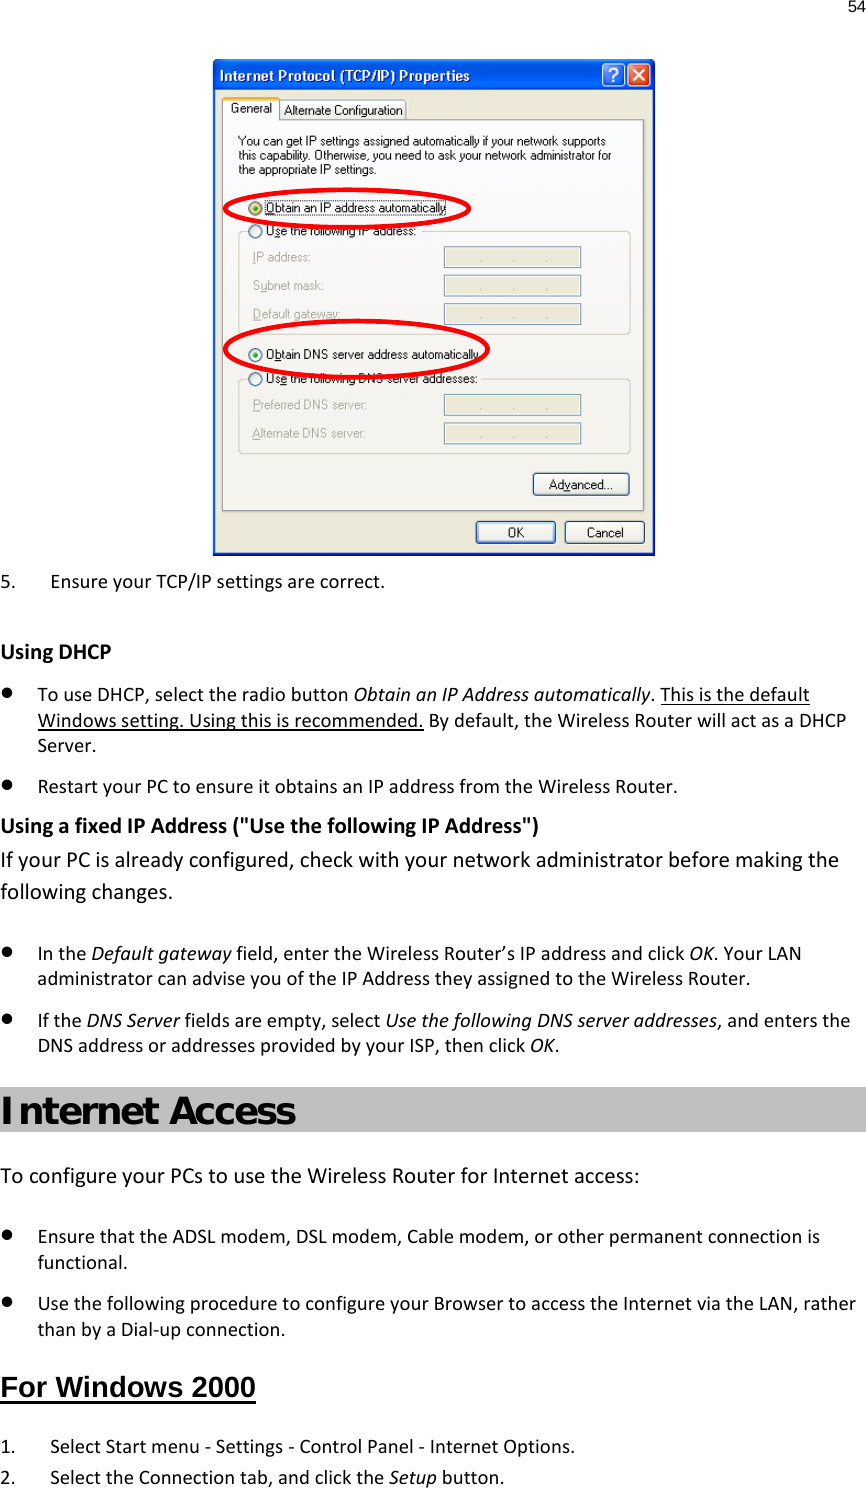 54   5. Ensure your TCP/IP settings are correct.  Using DHCP • To use DHCP, select the radio button Obtain an IP Address automatically. This is the default Windows setting. Using this is recommended. By default, the Wireless Router will act as a DHCP Server. • Restart your PC to ensure it obtains an IP address from the Wireless Router. Using a fixed IP Address (&quot;Use the following IP Address&quot;) If your PC is already configured, check with your network administrator before making the following changes. • In the Default gateway field, enter the Wireless Router’s IP address and click OK. Your LAN administrator can advise you of the IP Address they assigned to the Wireless Router. • If the DNS Server fields are empty, select Use the following DNS server addresses, and enters the DNS address or addresses provided by your ISP, then click OK. Internet Access To configure your PCs to use the Wireless Router for Internet access: • Ensure that the ADSL modem, DSL modem, Cable modem, or other permanent connection is functional.  • Use the following procedure to configure your Browser to access the Internet via the LAN, rather than by a Dial-up connection.  For Windows 2000 1. Select Start menu - Settings - Control Panel - Internet Options.  2. Select the Connection tab, and click the Setup button. 